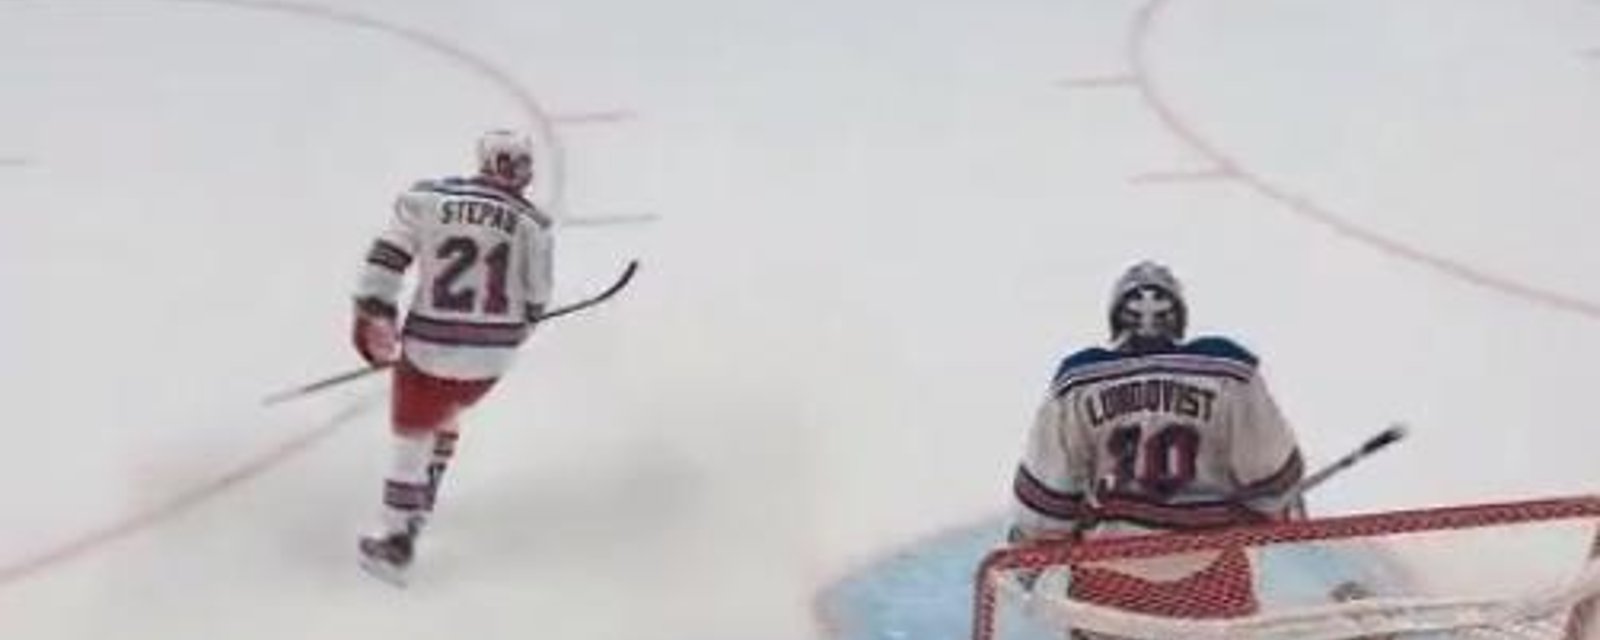 Lundqvist, Stepan pissed at each other during game 5! 